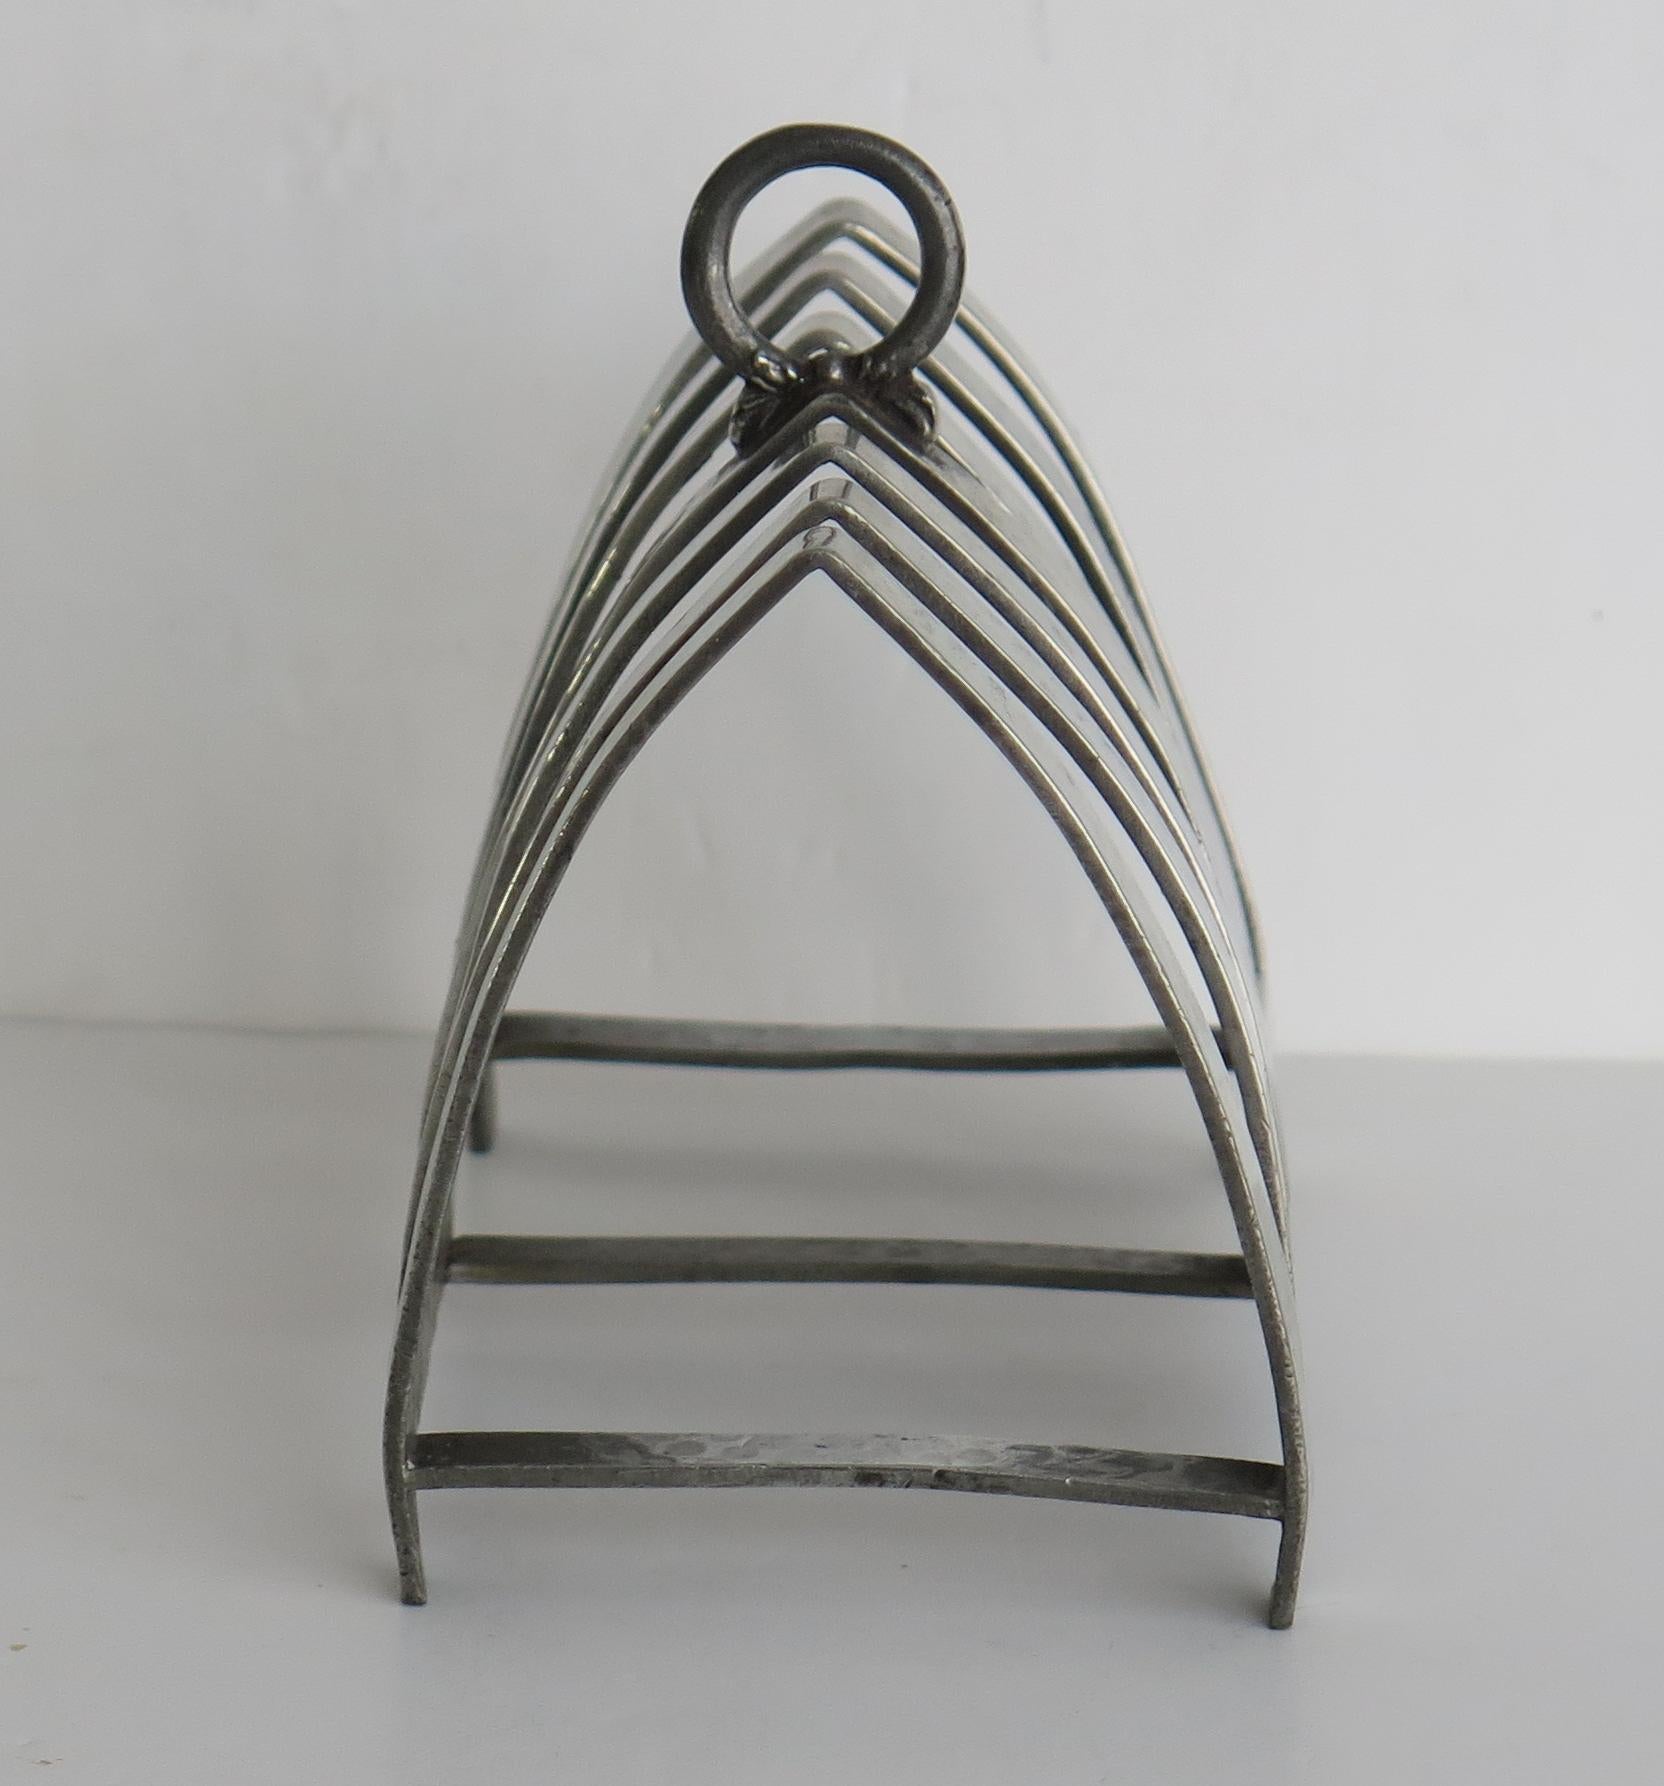 This is a good hand made, hammered pewter Toast rack made by Connells of 88 Cheapside, London, during the Art Deco period, Circa 1925

The shape is very 